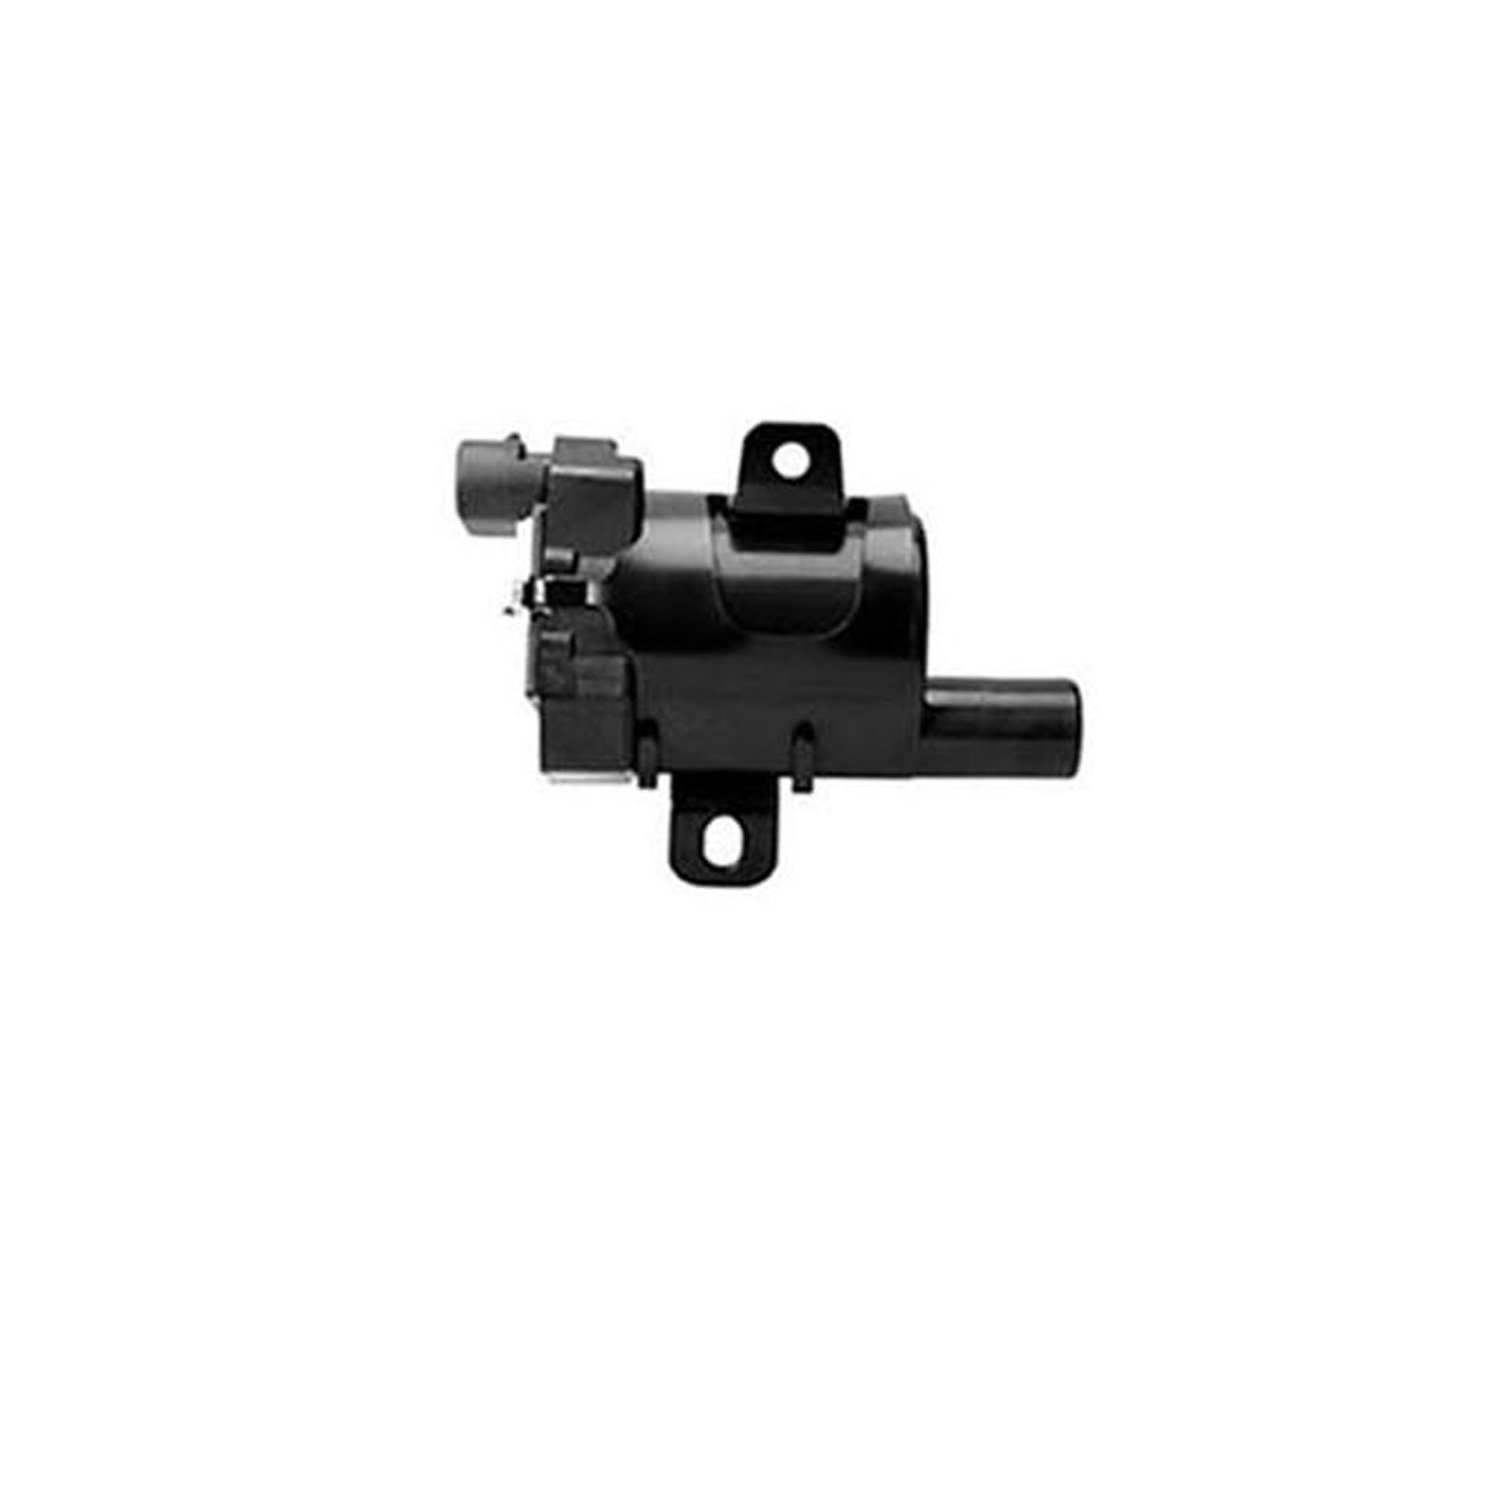 OE Replacement Ignition Coil for GM Sierra/Yukon 4.8L/5.3L/6.0L